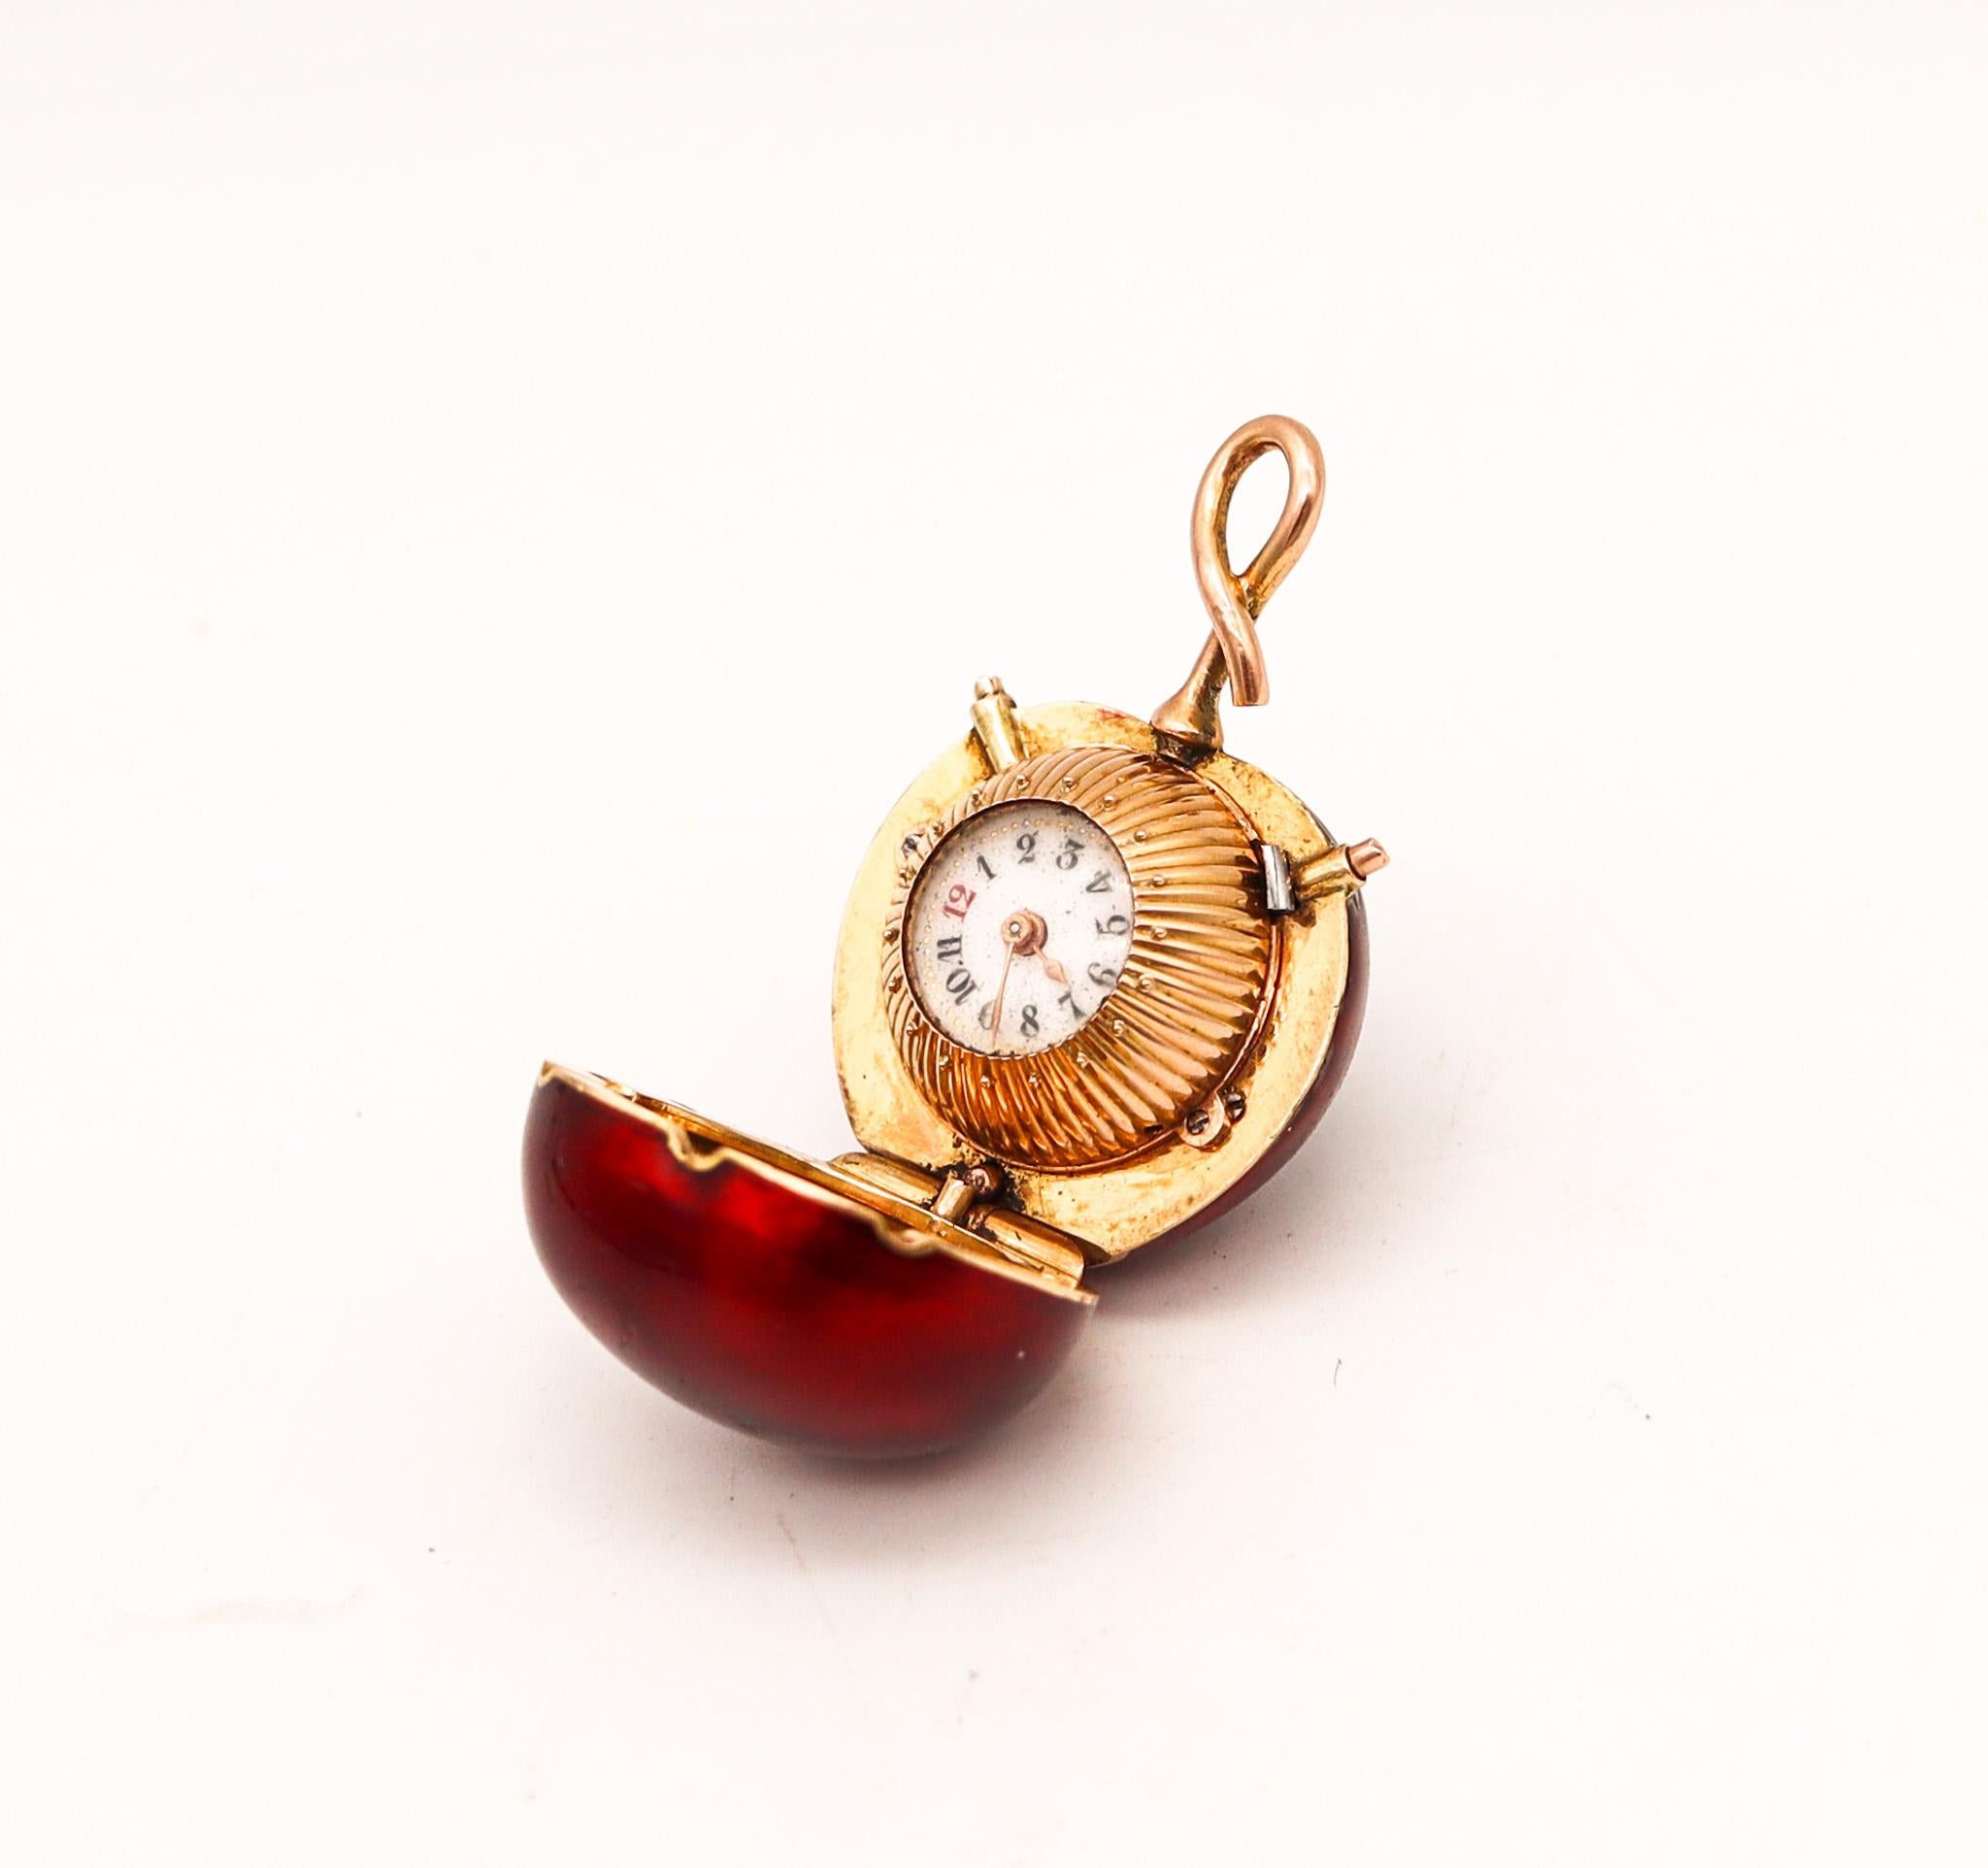 Enameled pendant bezel wind watch in the shape of a cherry.

Fantastic miniature cherry shaped pendant watch, created in Switzerland, back in the 1910-1920. The movement is mechanical, bezel wind and the case was crafted in solid yellow gold of 18